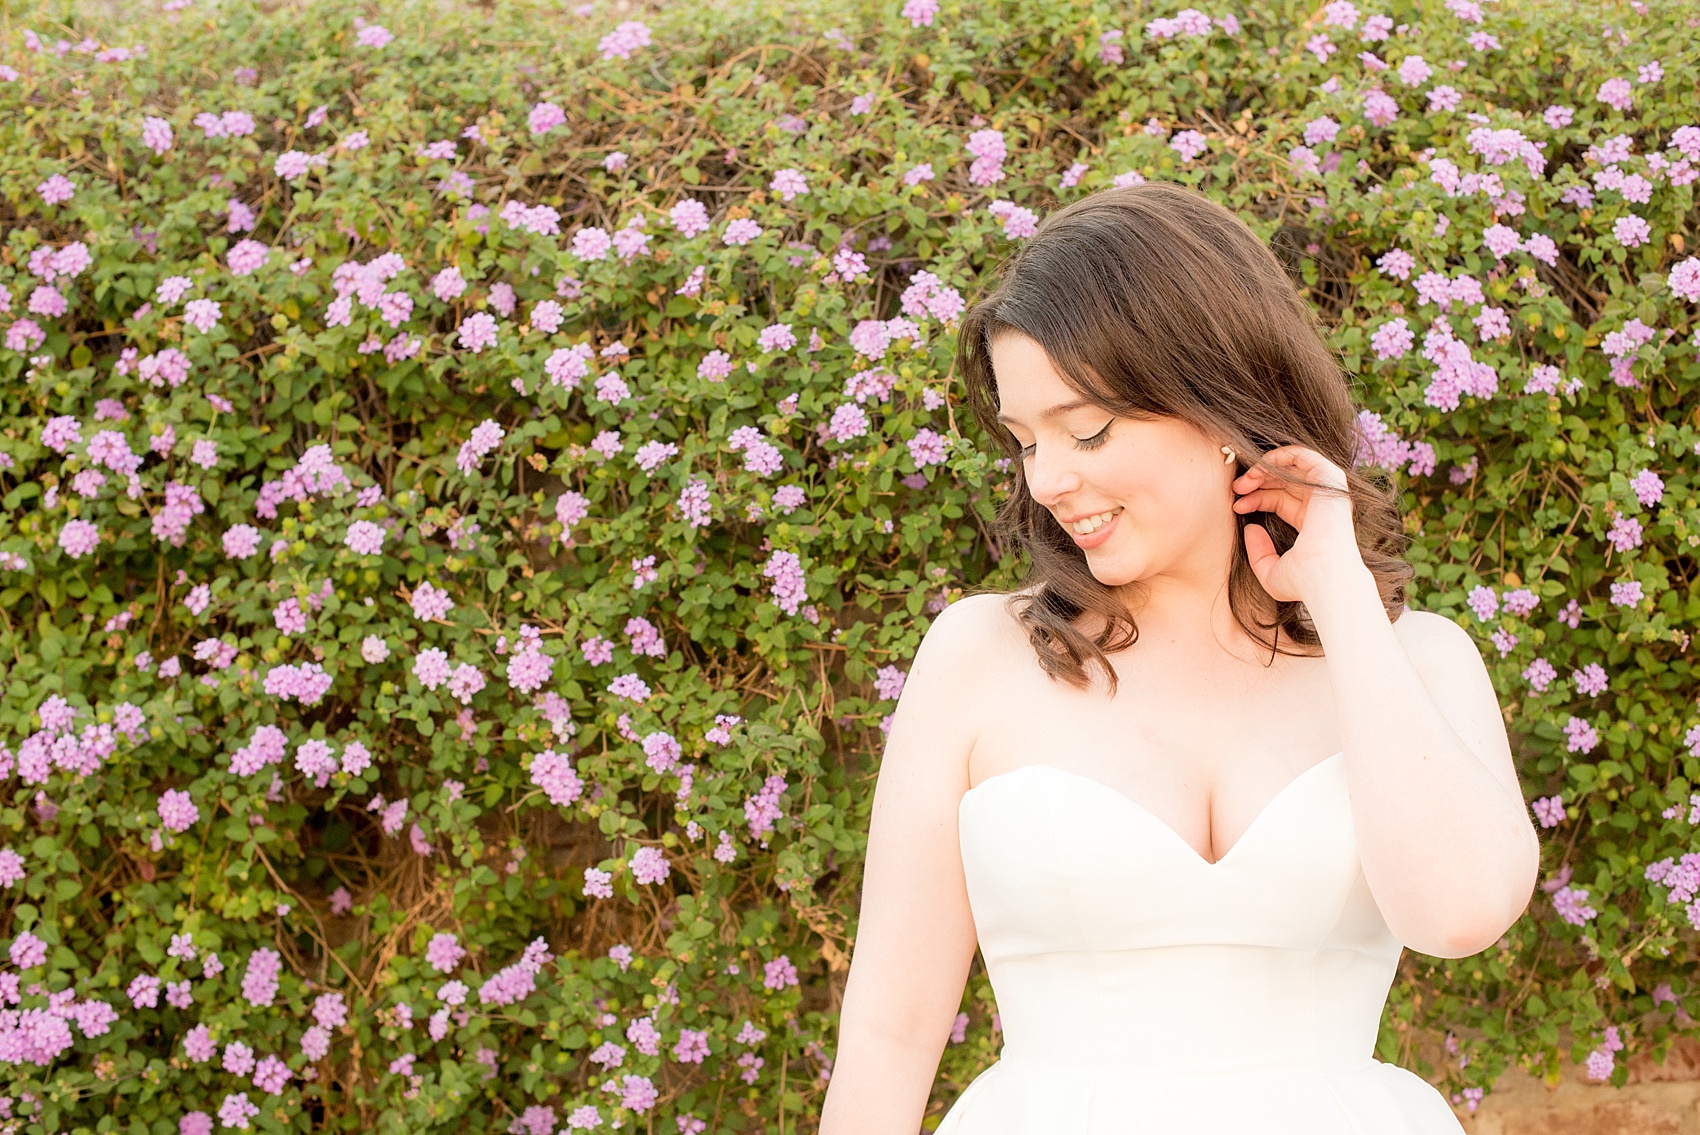 Mikkel Paige Photography bridal photo portrait with cat-eye makeup for her wedding at Testarossa Winery in California.